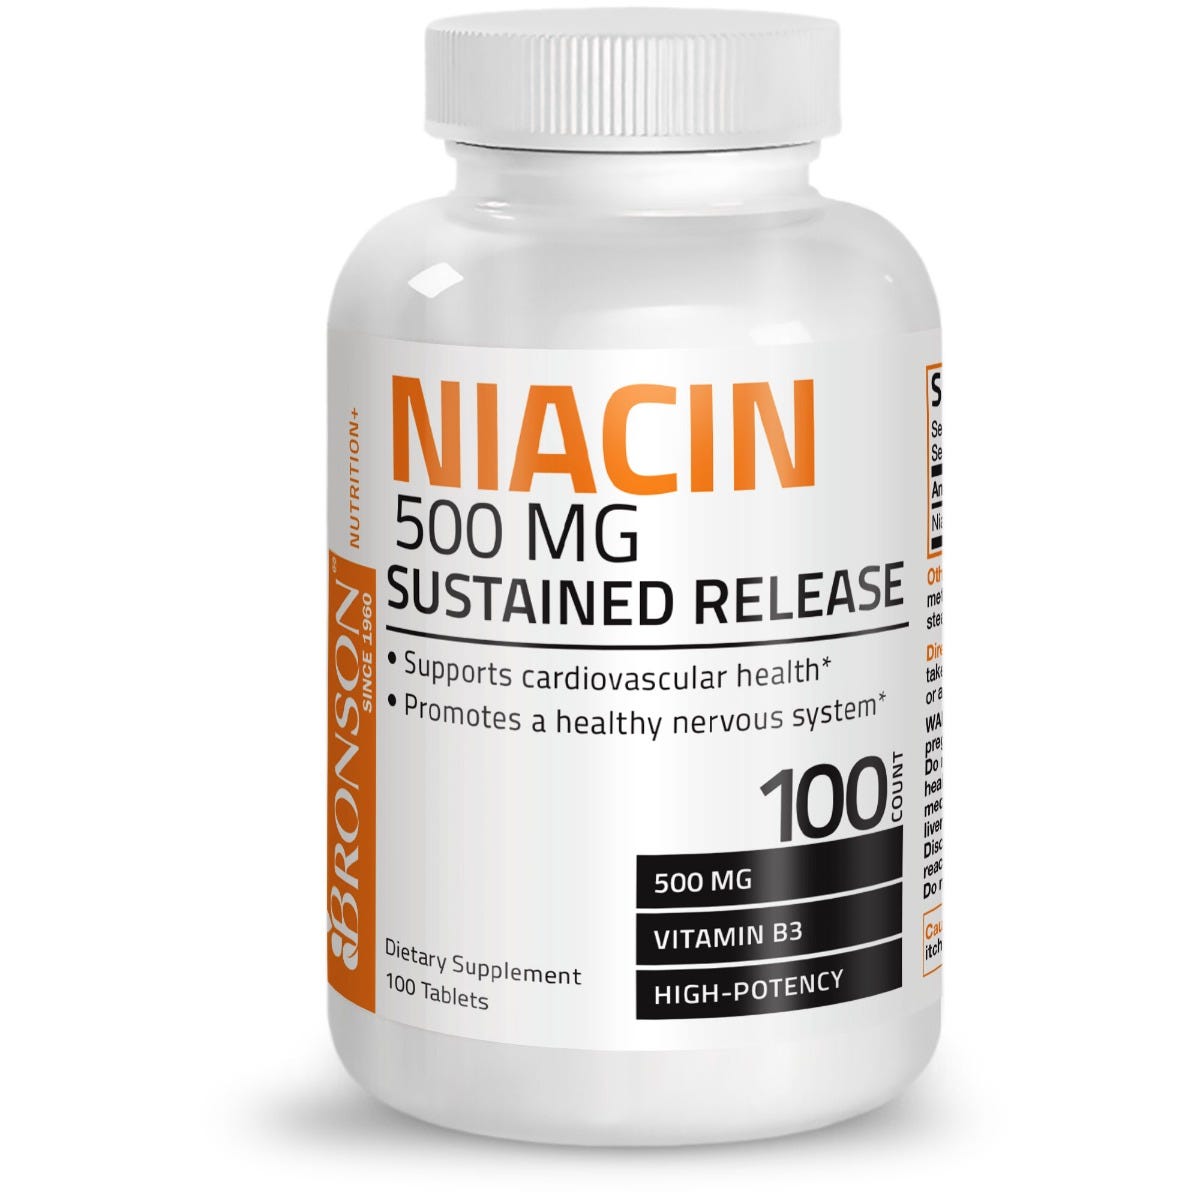 Niacin Vitamin B3 Sustained Release - 500 mg view 1 of 4